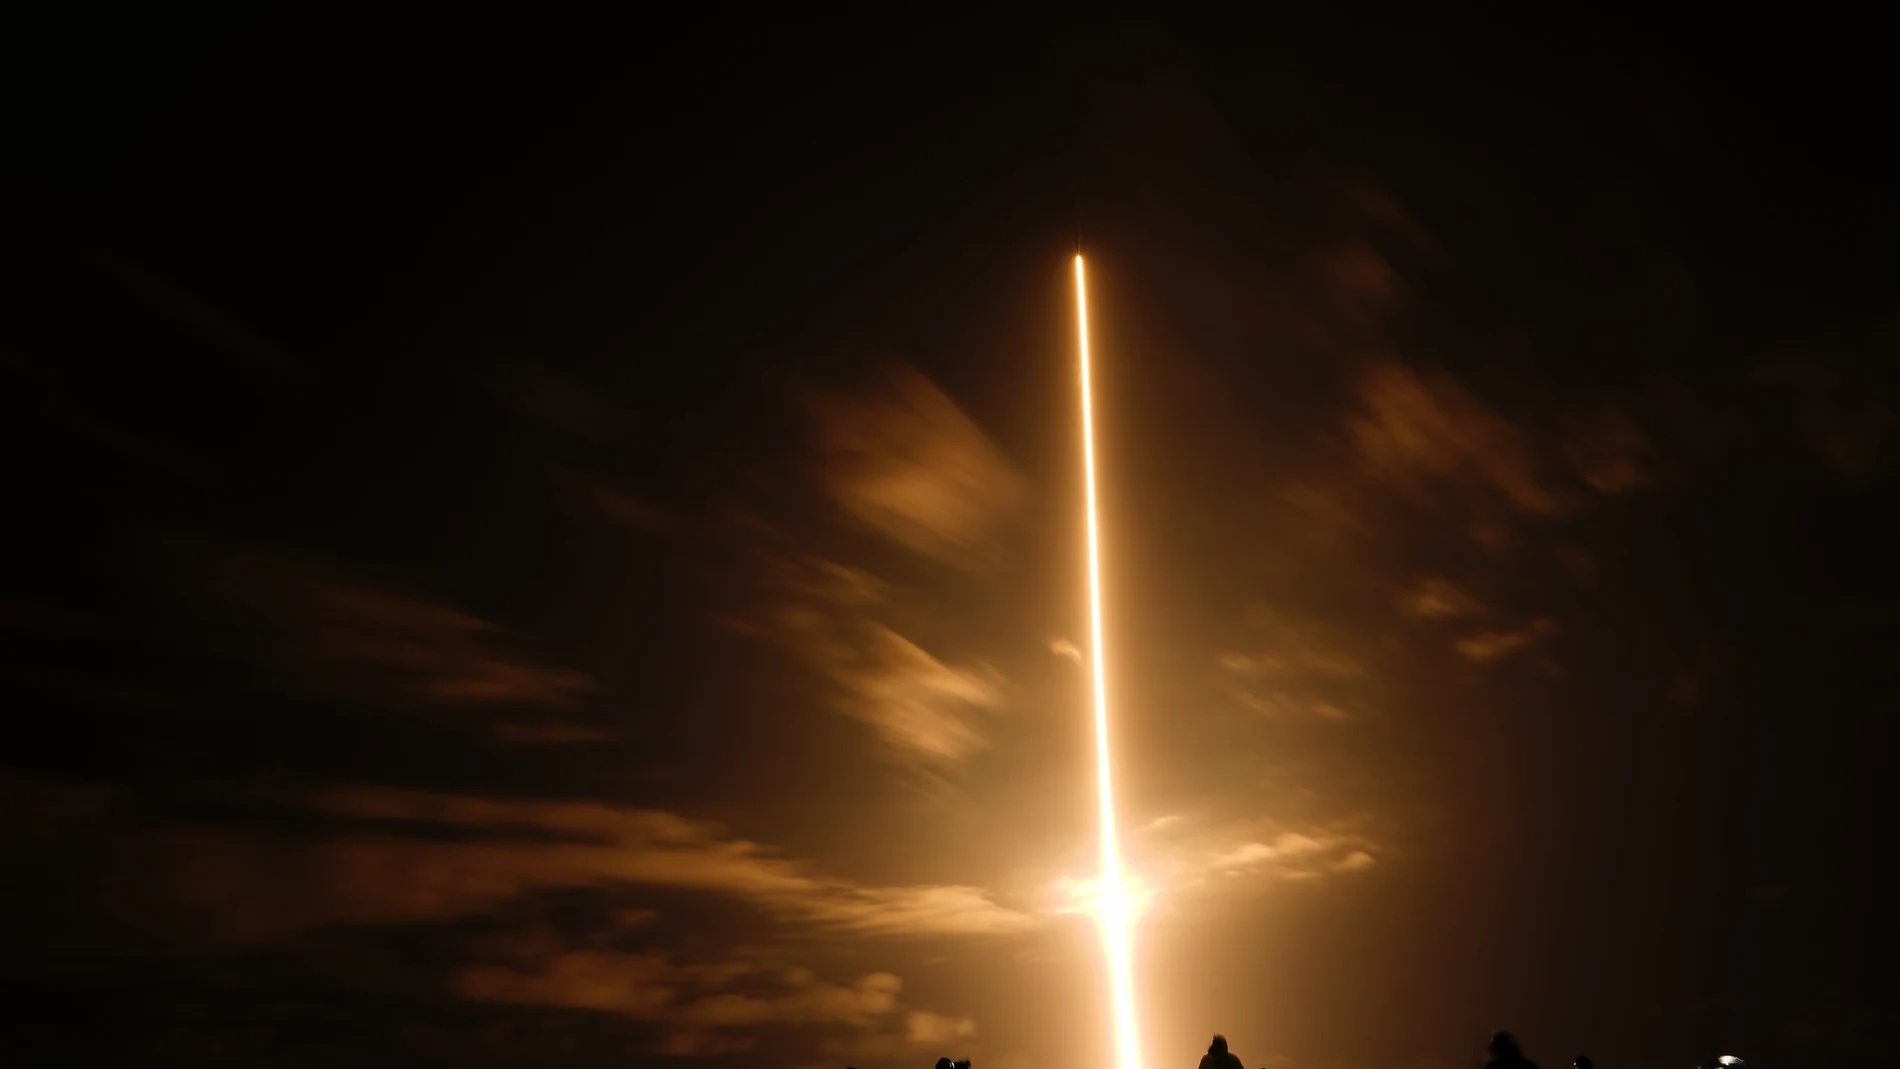 A SpaceX Falcon 9 rocket with the Crew Dragon space capsule lifts off from pad 39A at the Kennedy Space Center on Friday, April, 23, 2021 in Cape Canaveral, Fla. (AP Photo/Brynn Anderson)